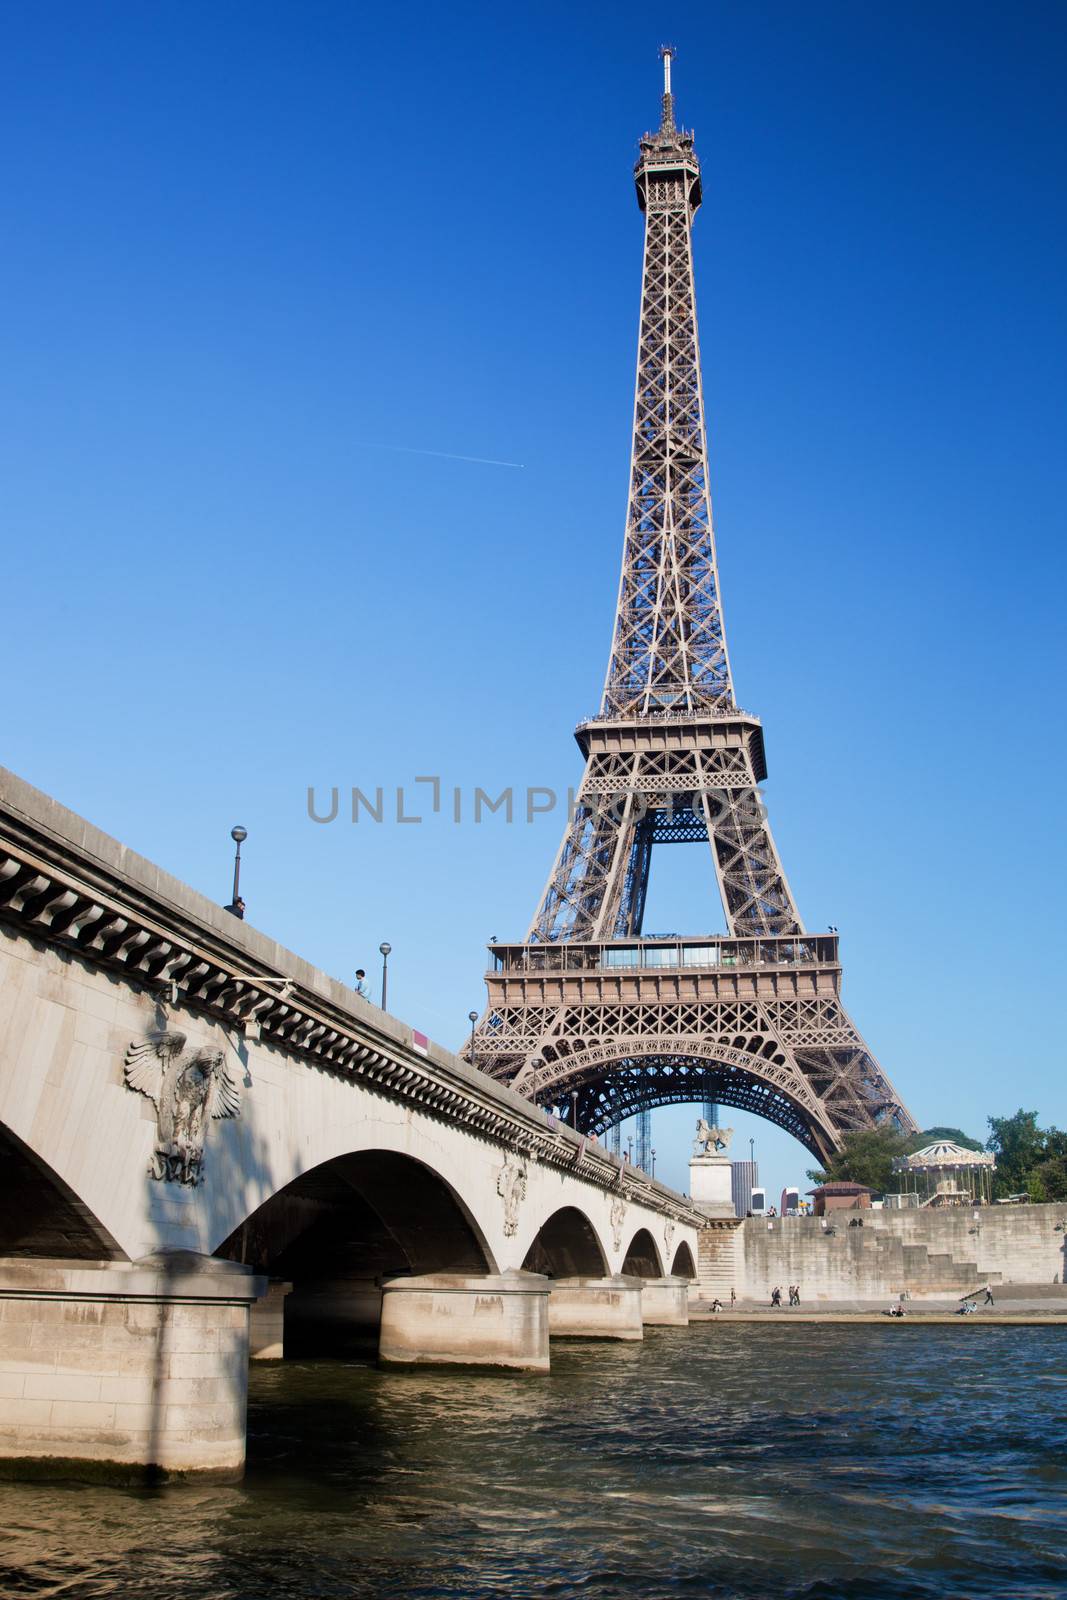 Eiffel Tower and bridge on Seine river in Paris, France at a sunny day